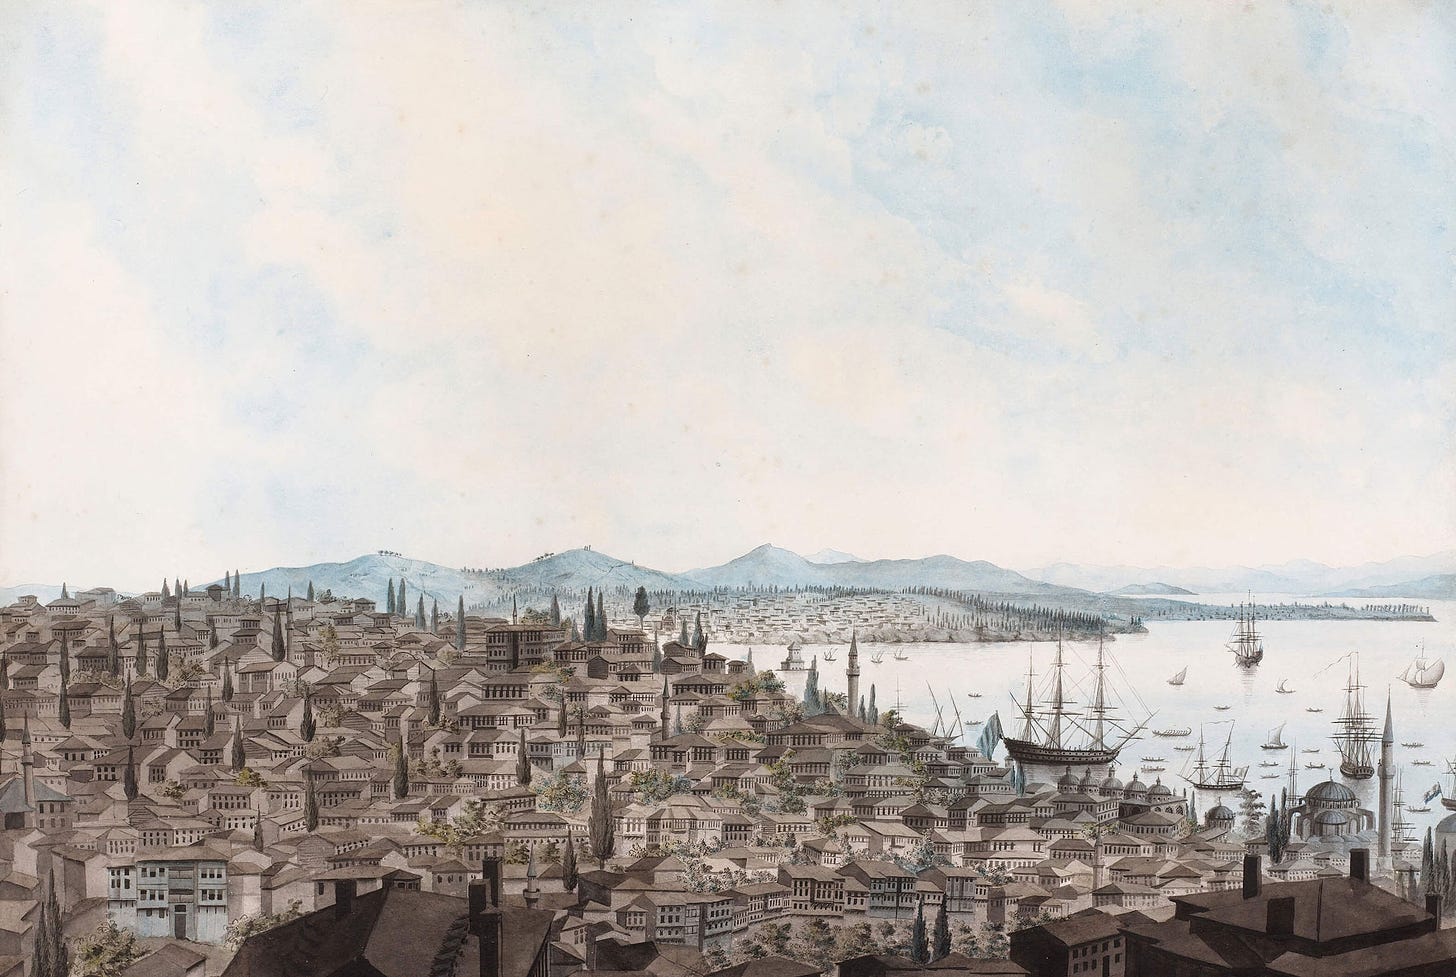 Melling's image of the European Istanbul from the Galata Tower shows tall mountains in the background with ships, the Bosphorus Strait and small houses on a hill in the foreground.